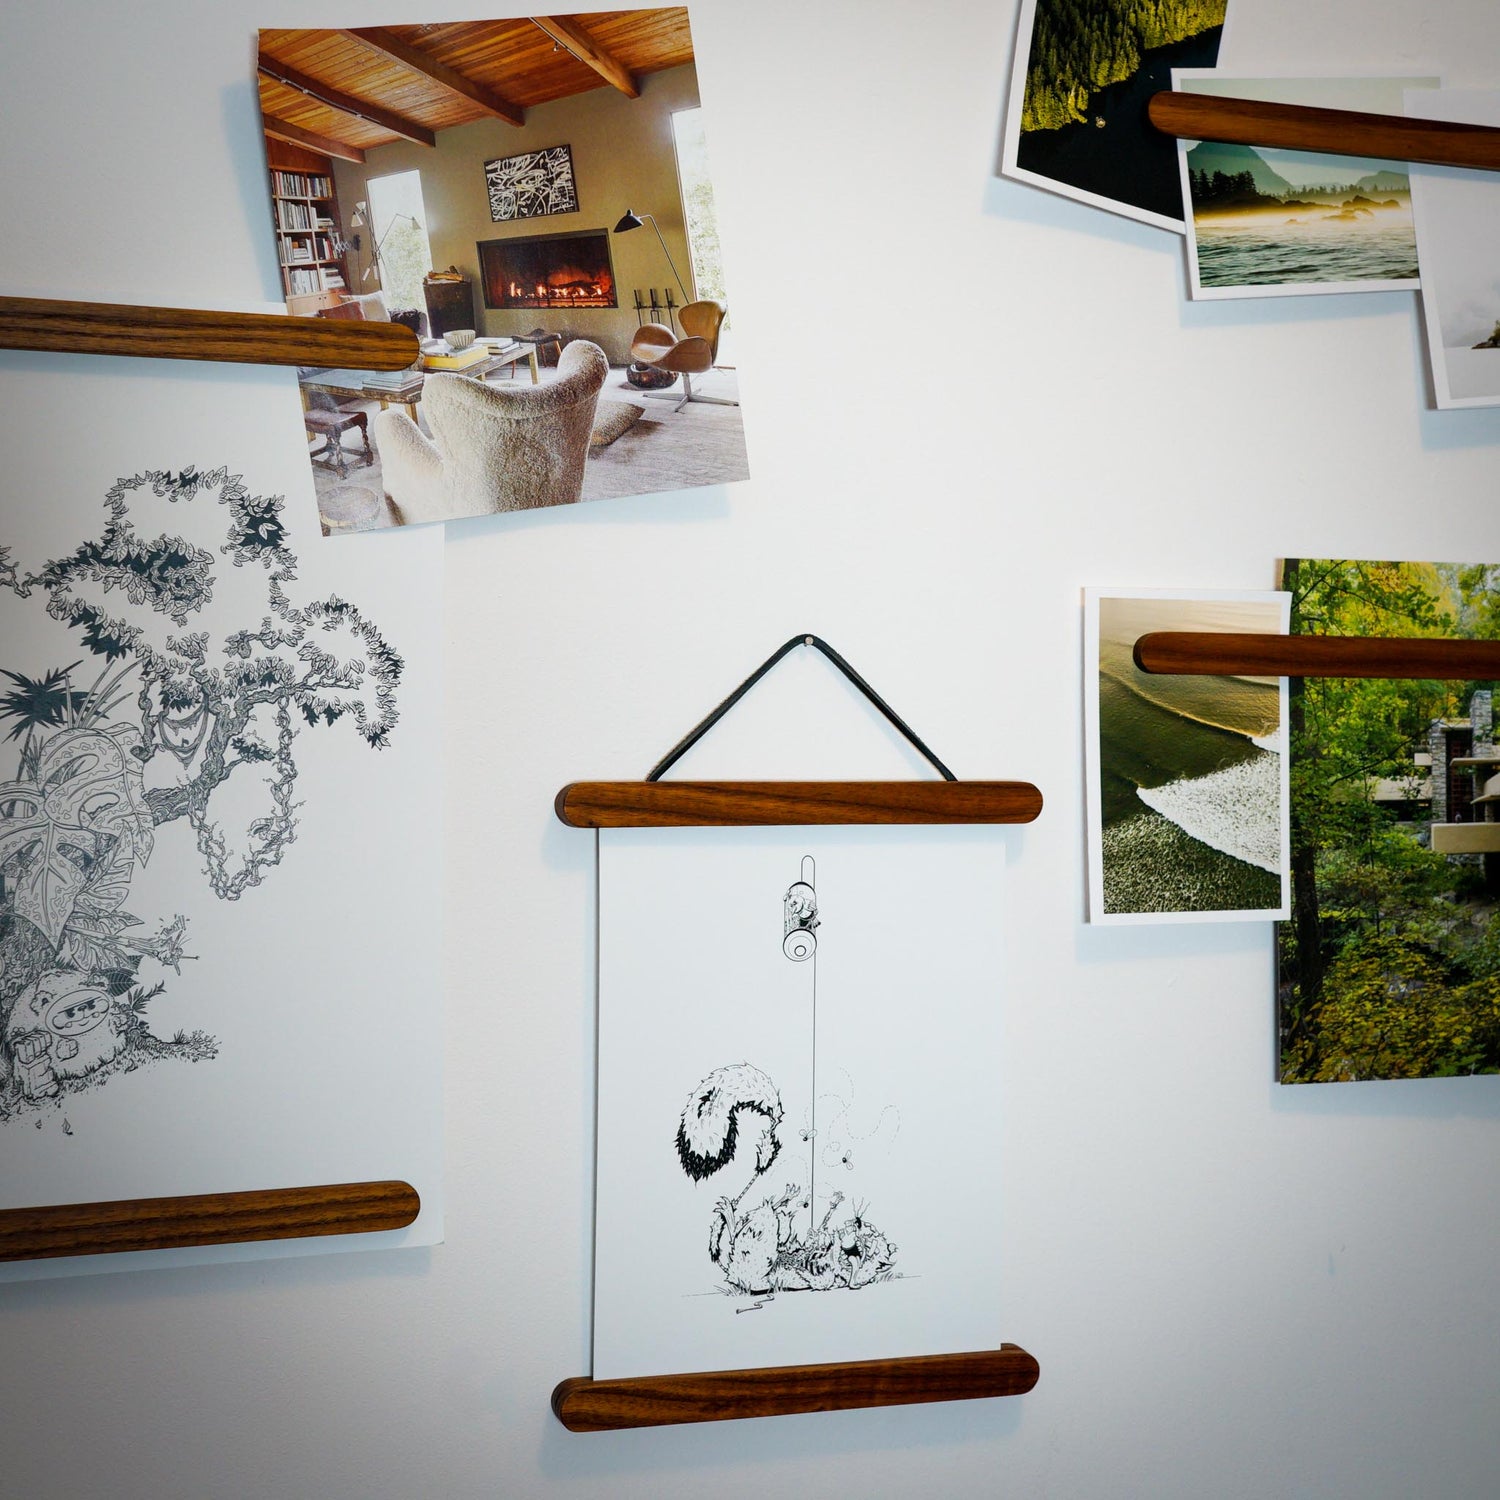 The Magnet Sticks, by Biglow Woodcraft; a wooden support for papers, photographs and images. A set of magnet sticks with photographs installed on a white wall. Hardwood Roasted ash